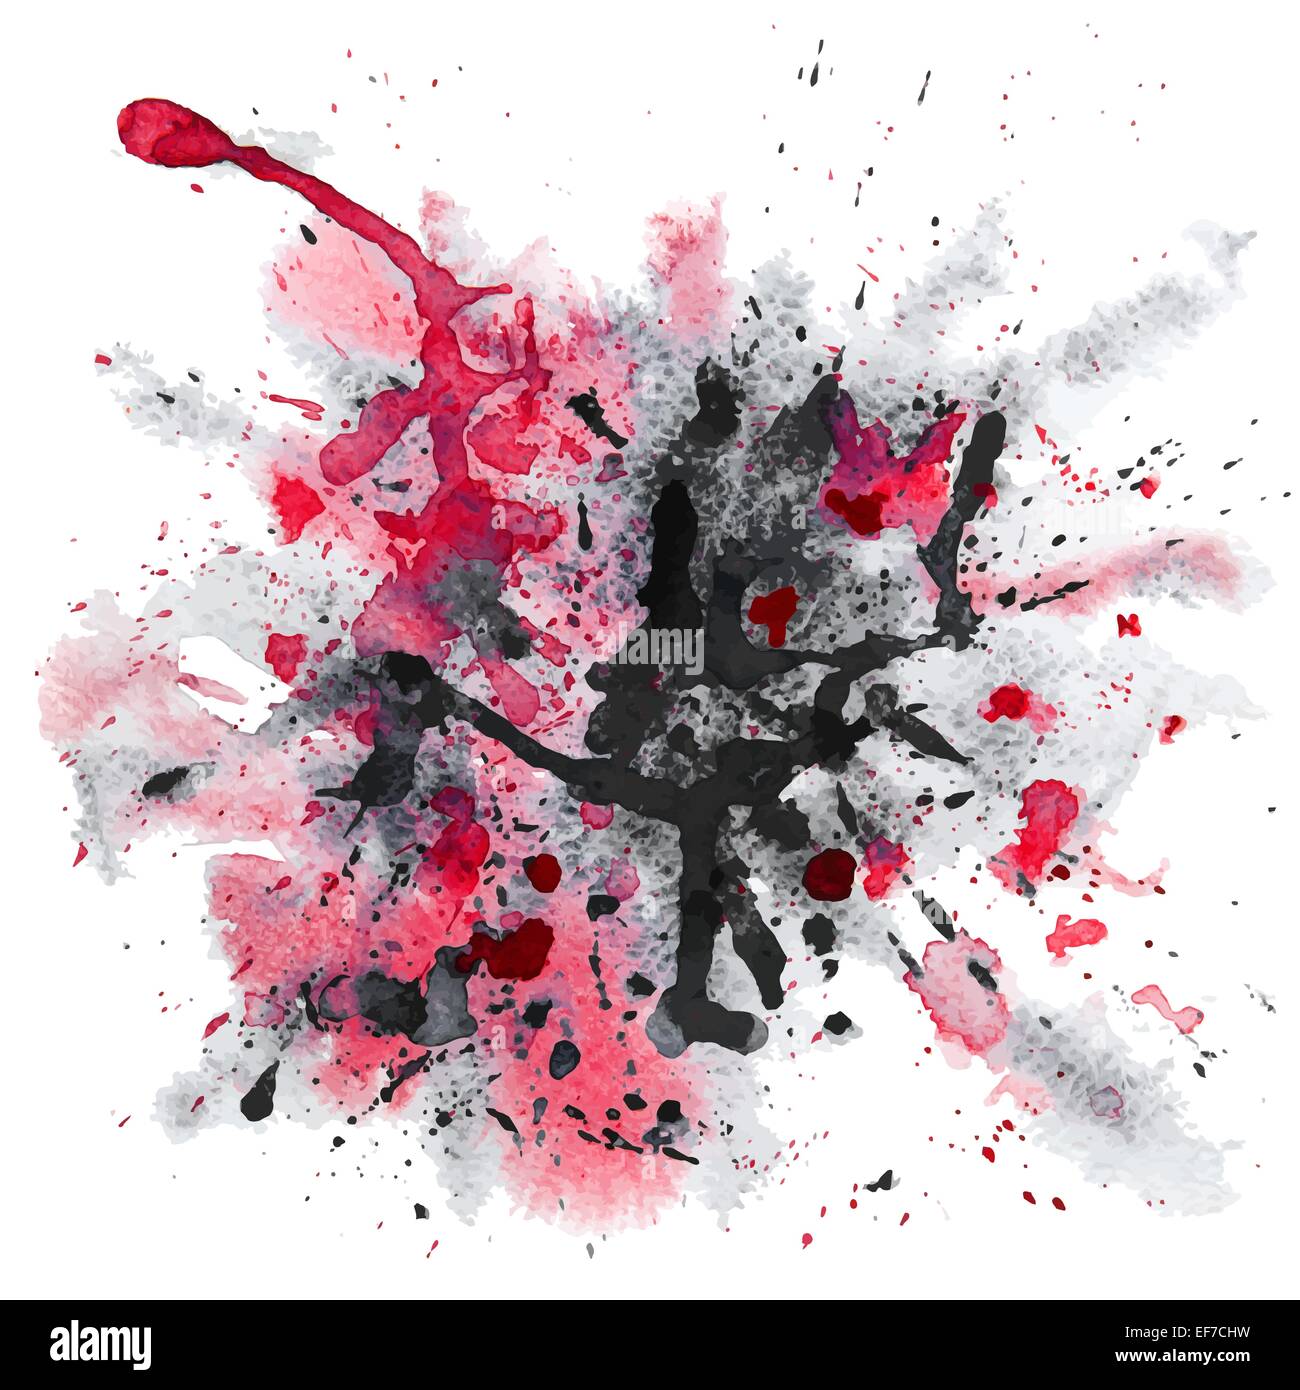 Vector Red and black Grunge Background With Watercolor Splash Stock Vector